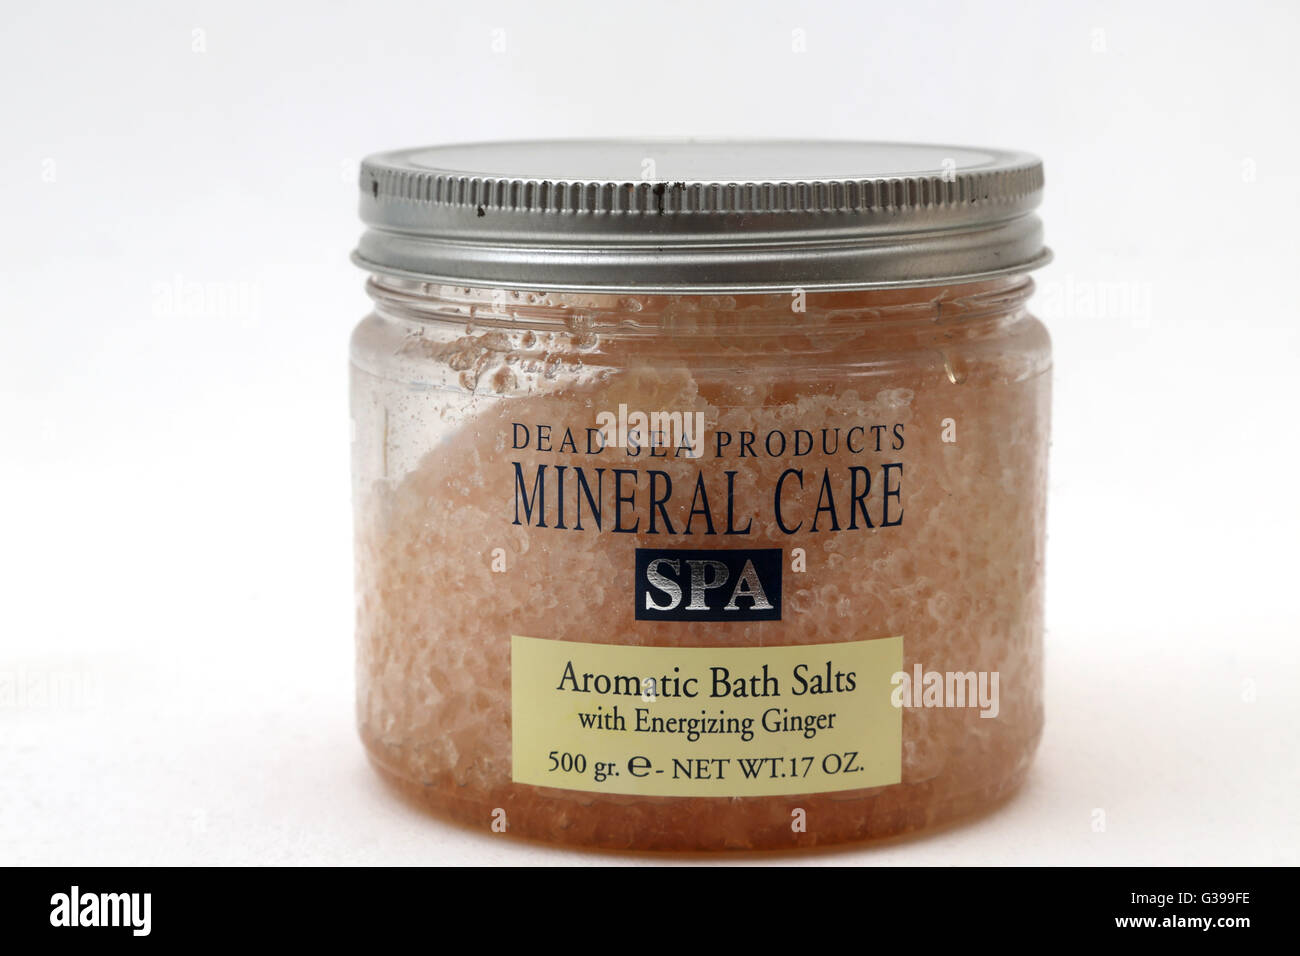 Dead Sea Products Mineral Care Spa Bath Salts With Ginger Stock Photo Alamy